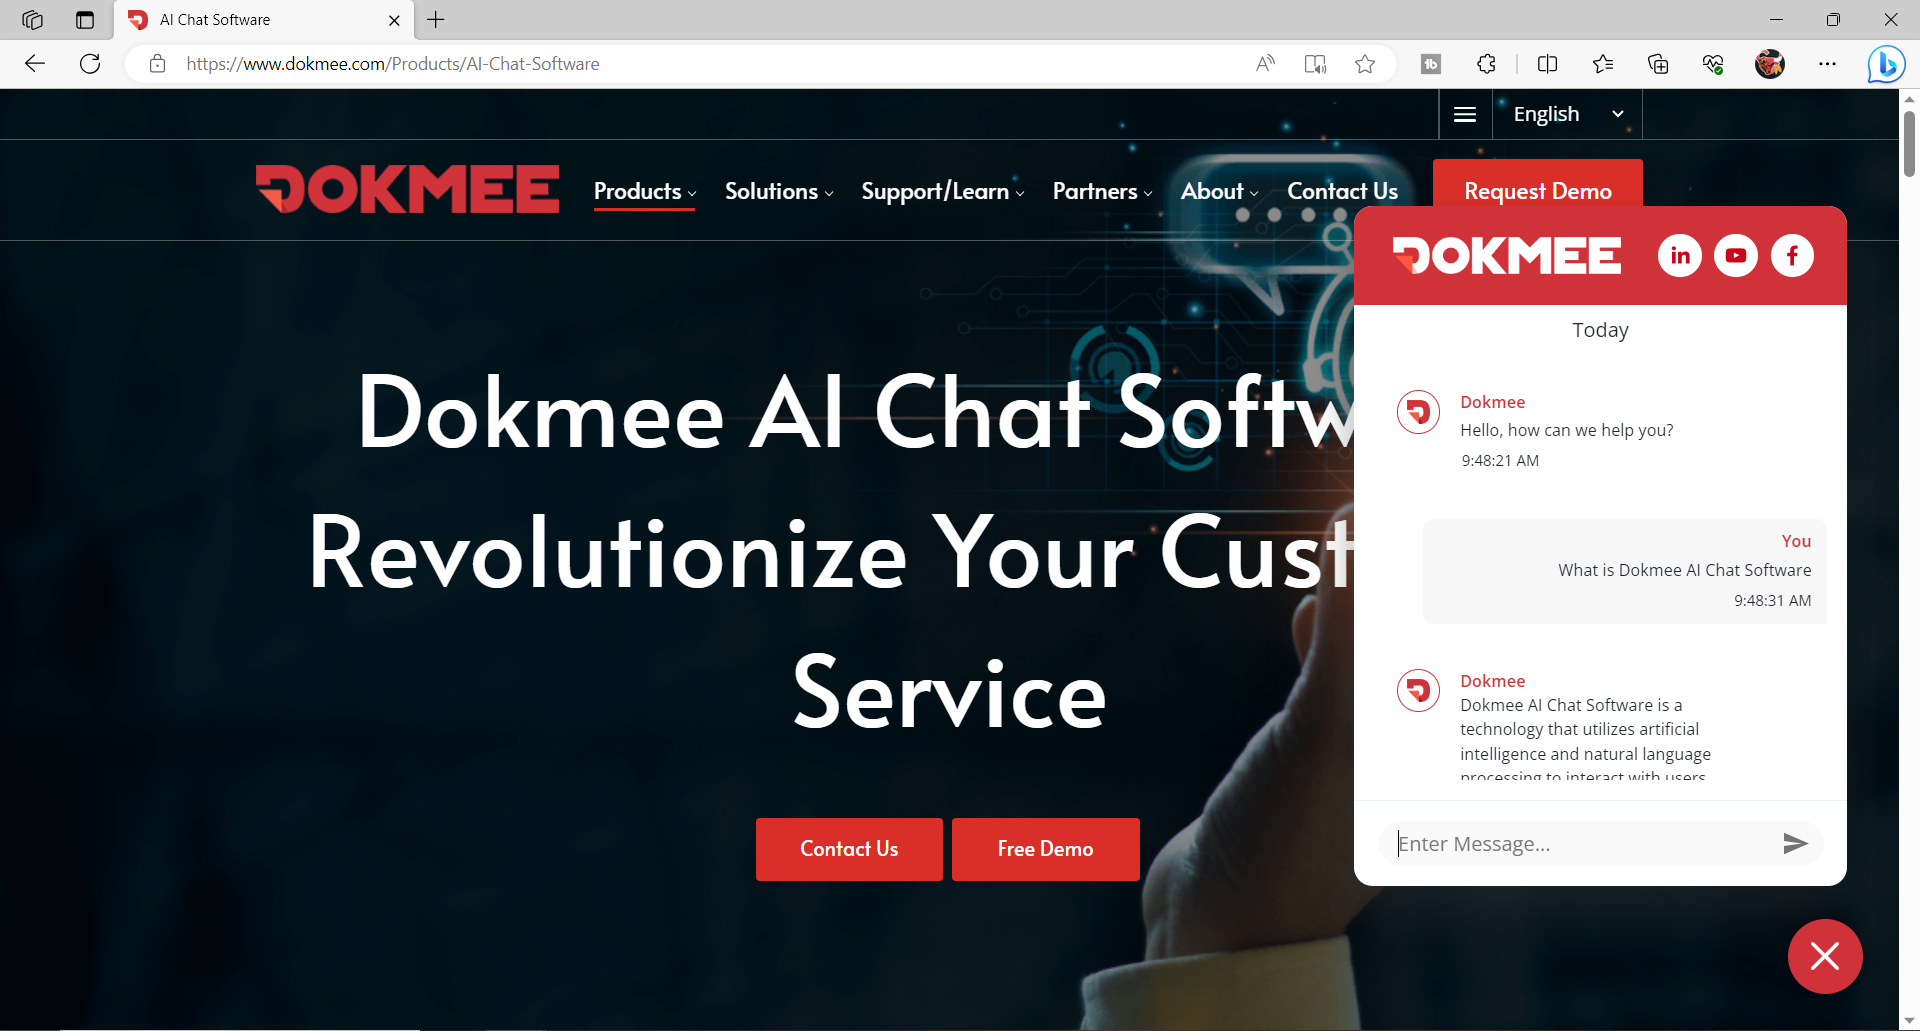 Dokmee AI Chat Software - Live In Action